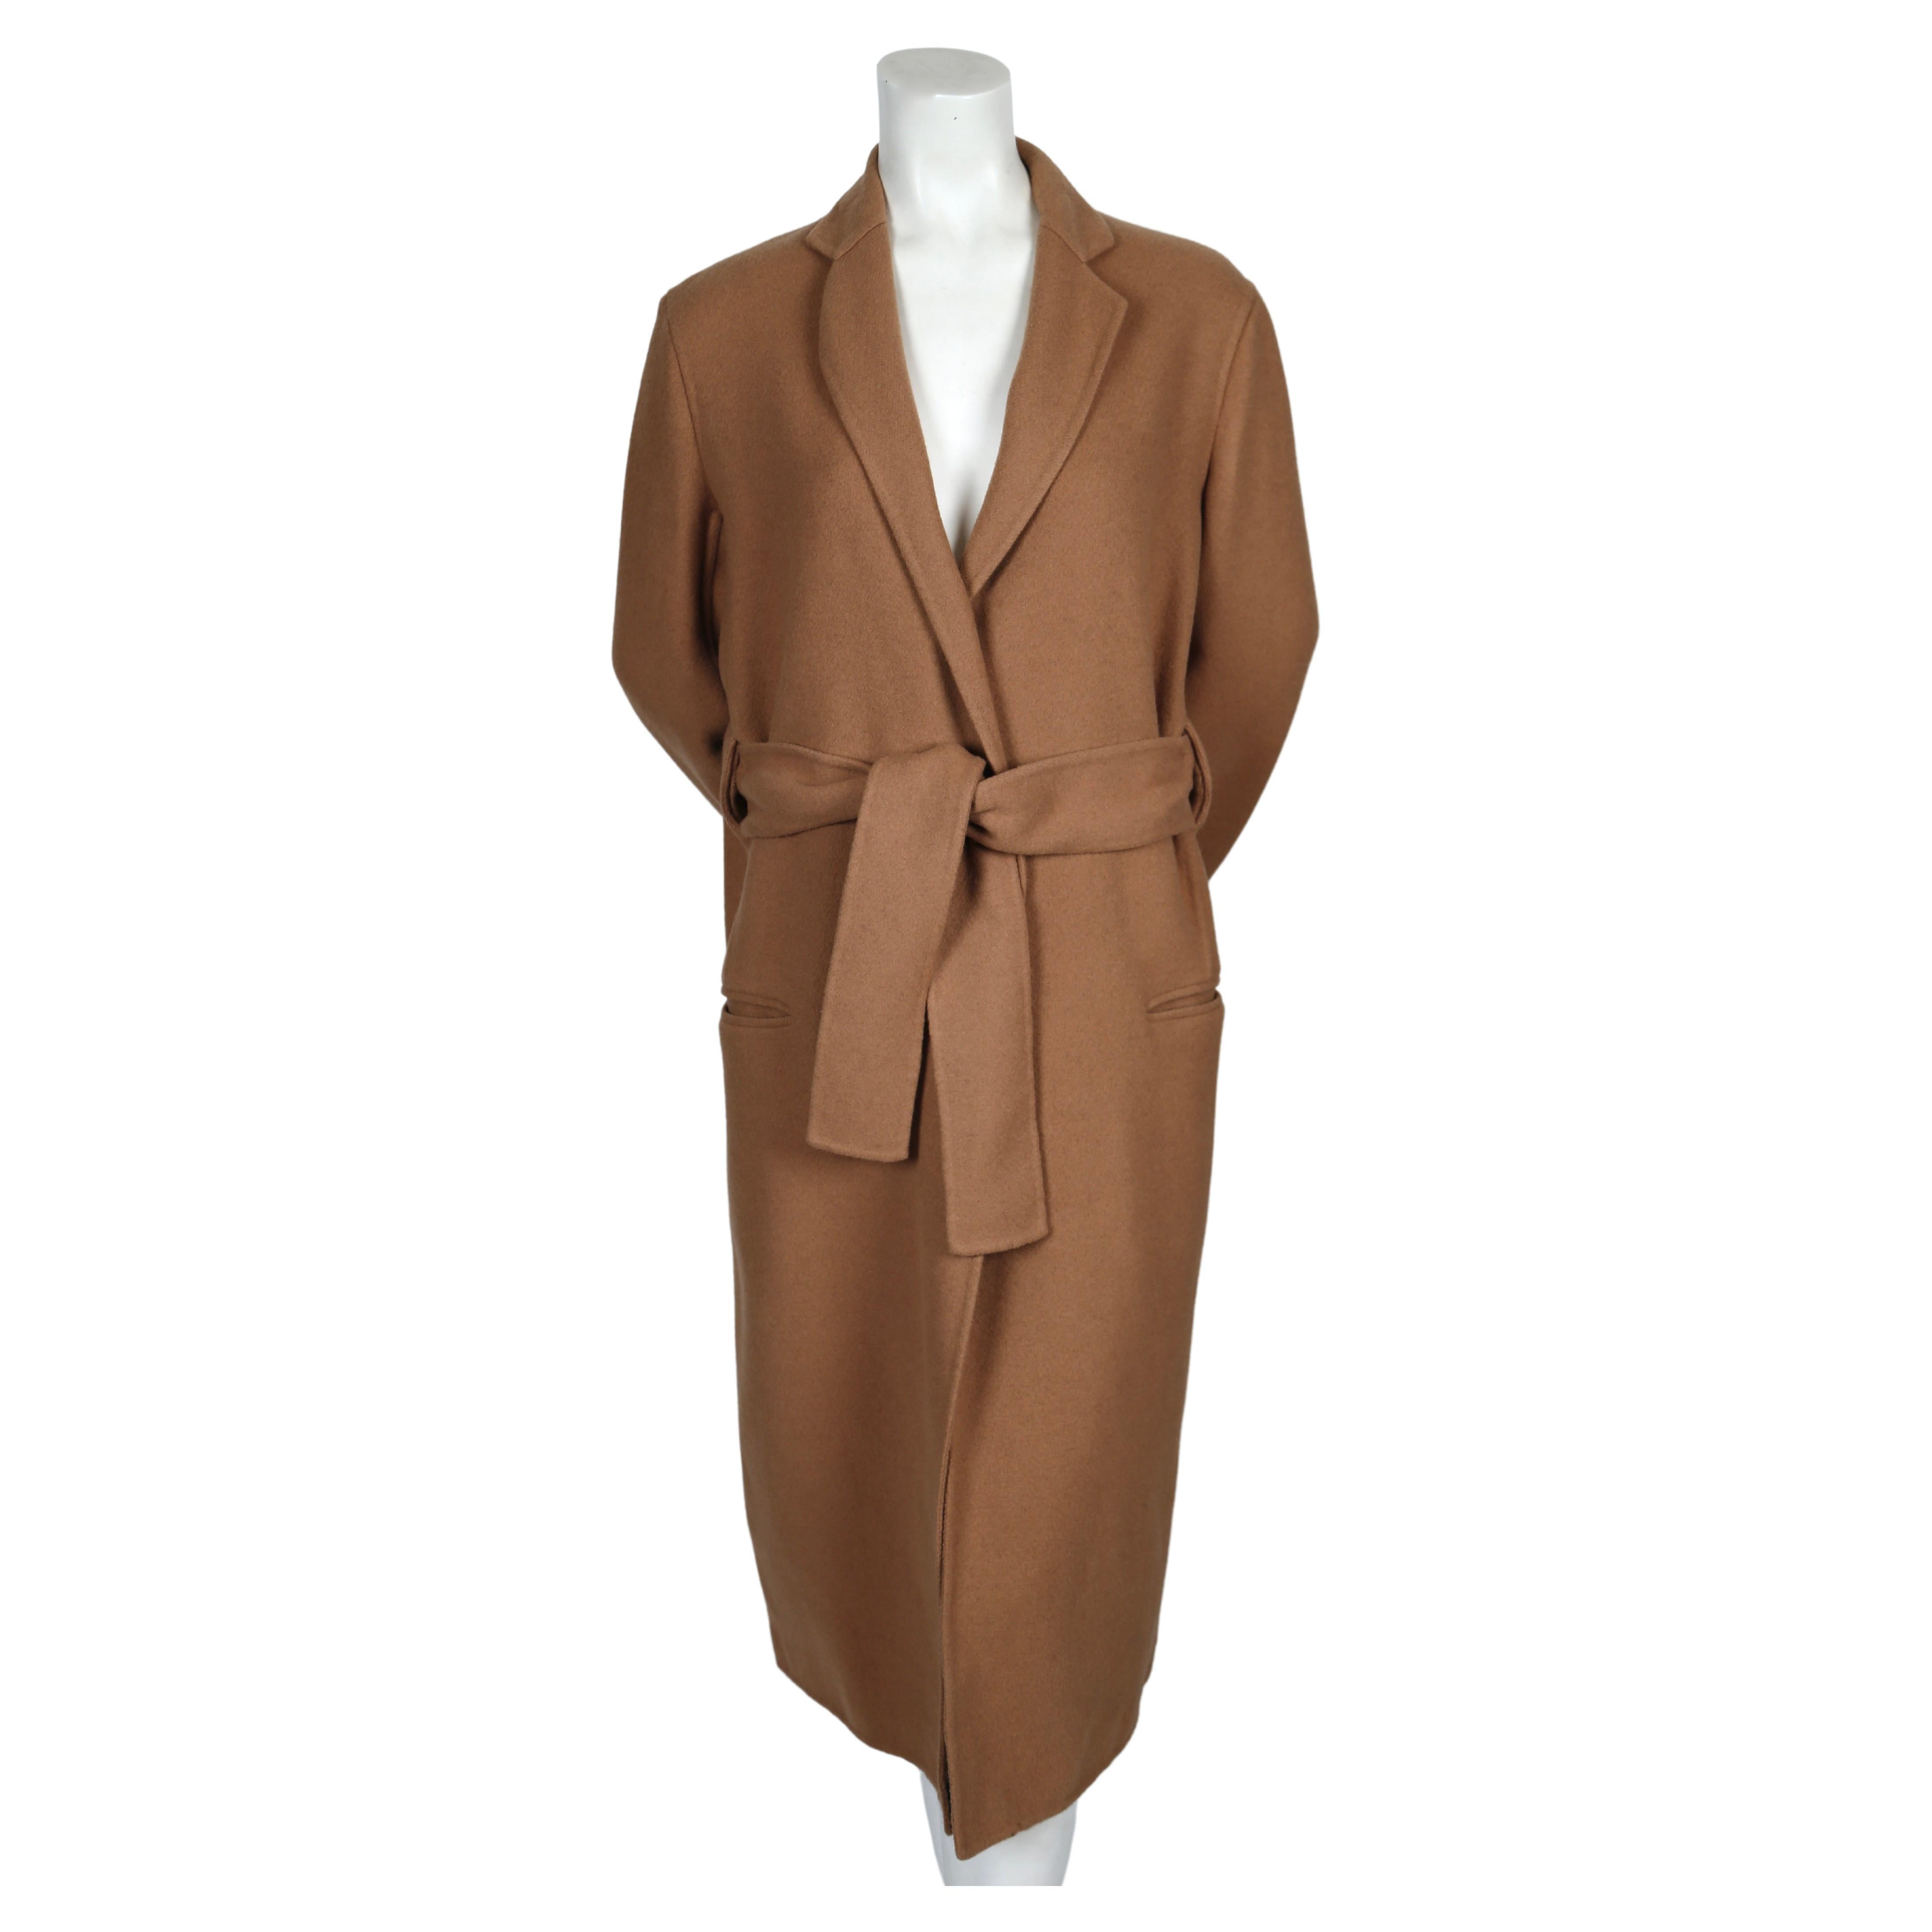 Very soft, camel double faced cashmere coat with wrap around belt designed by Phoebe Philo for Celine. Belt cleverly threads through the back of the coat for a clean line.  French size 38.  Approximate measurements: shoulder 18